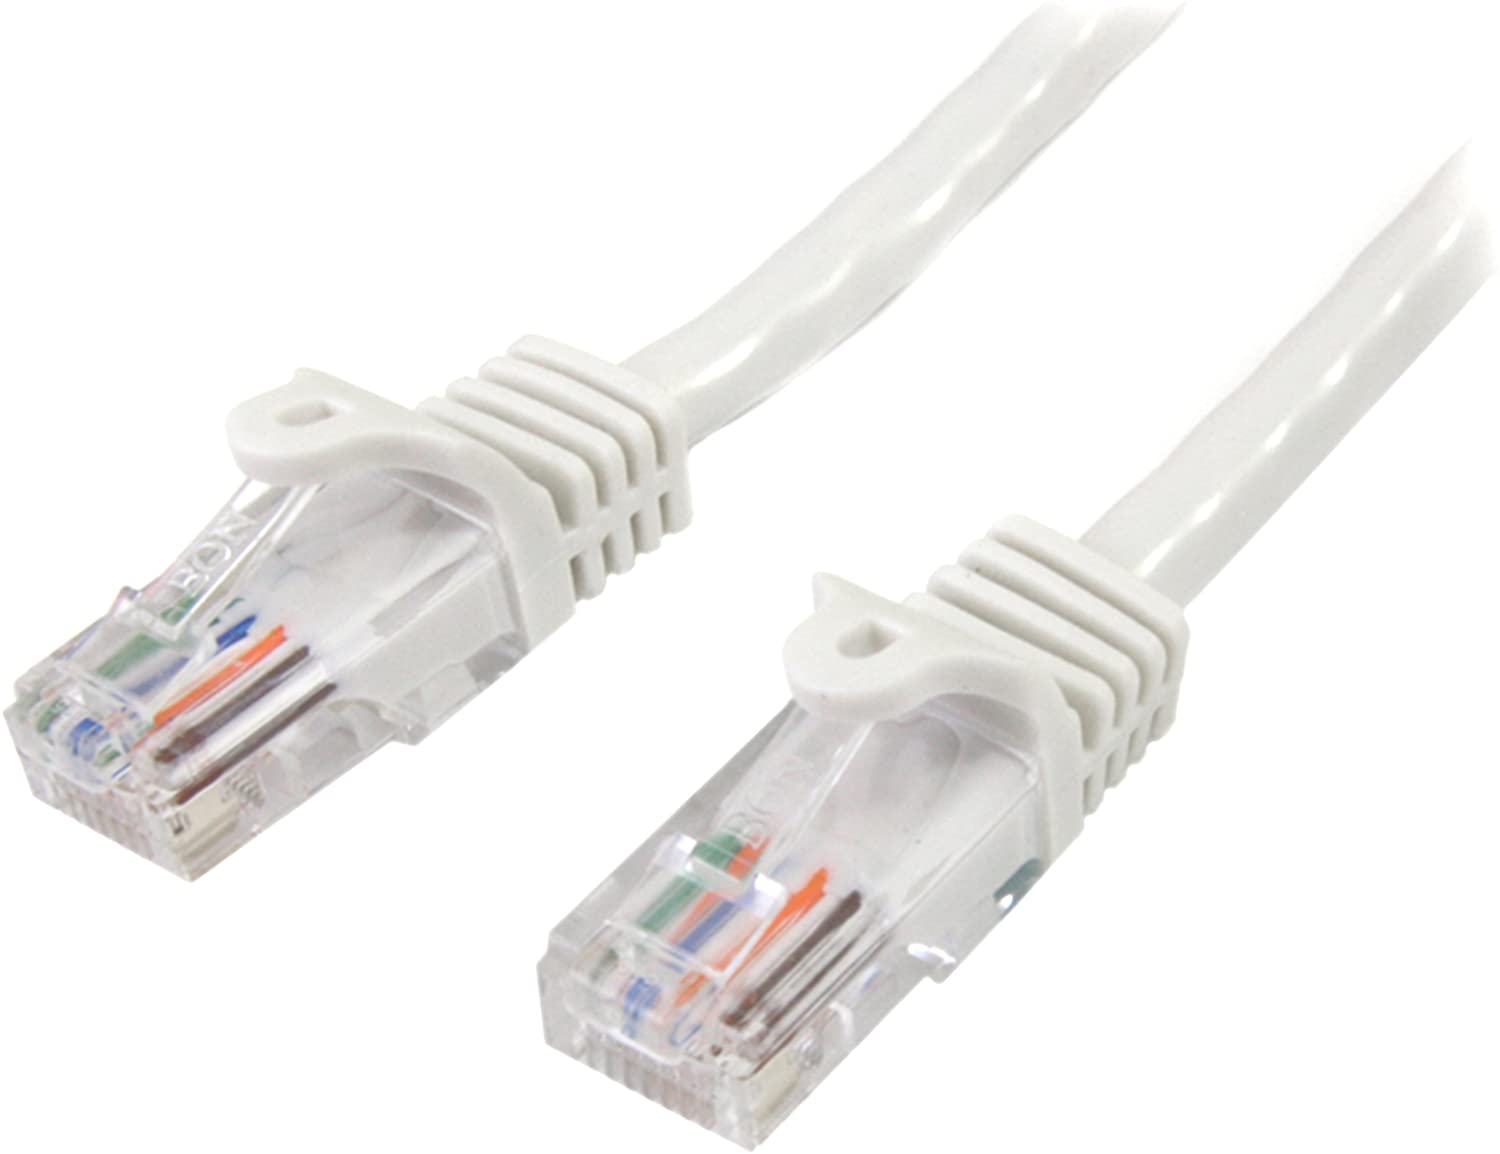 7 Foot Pre-made Cat5e Cable